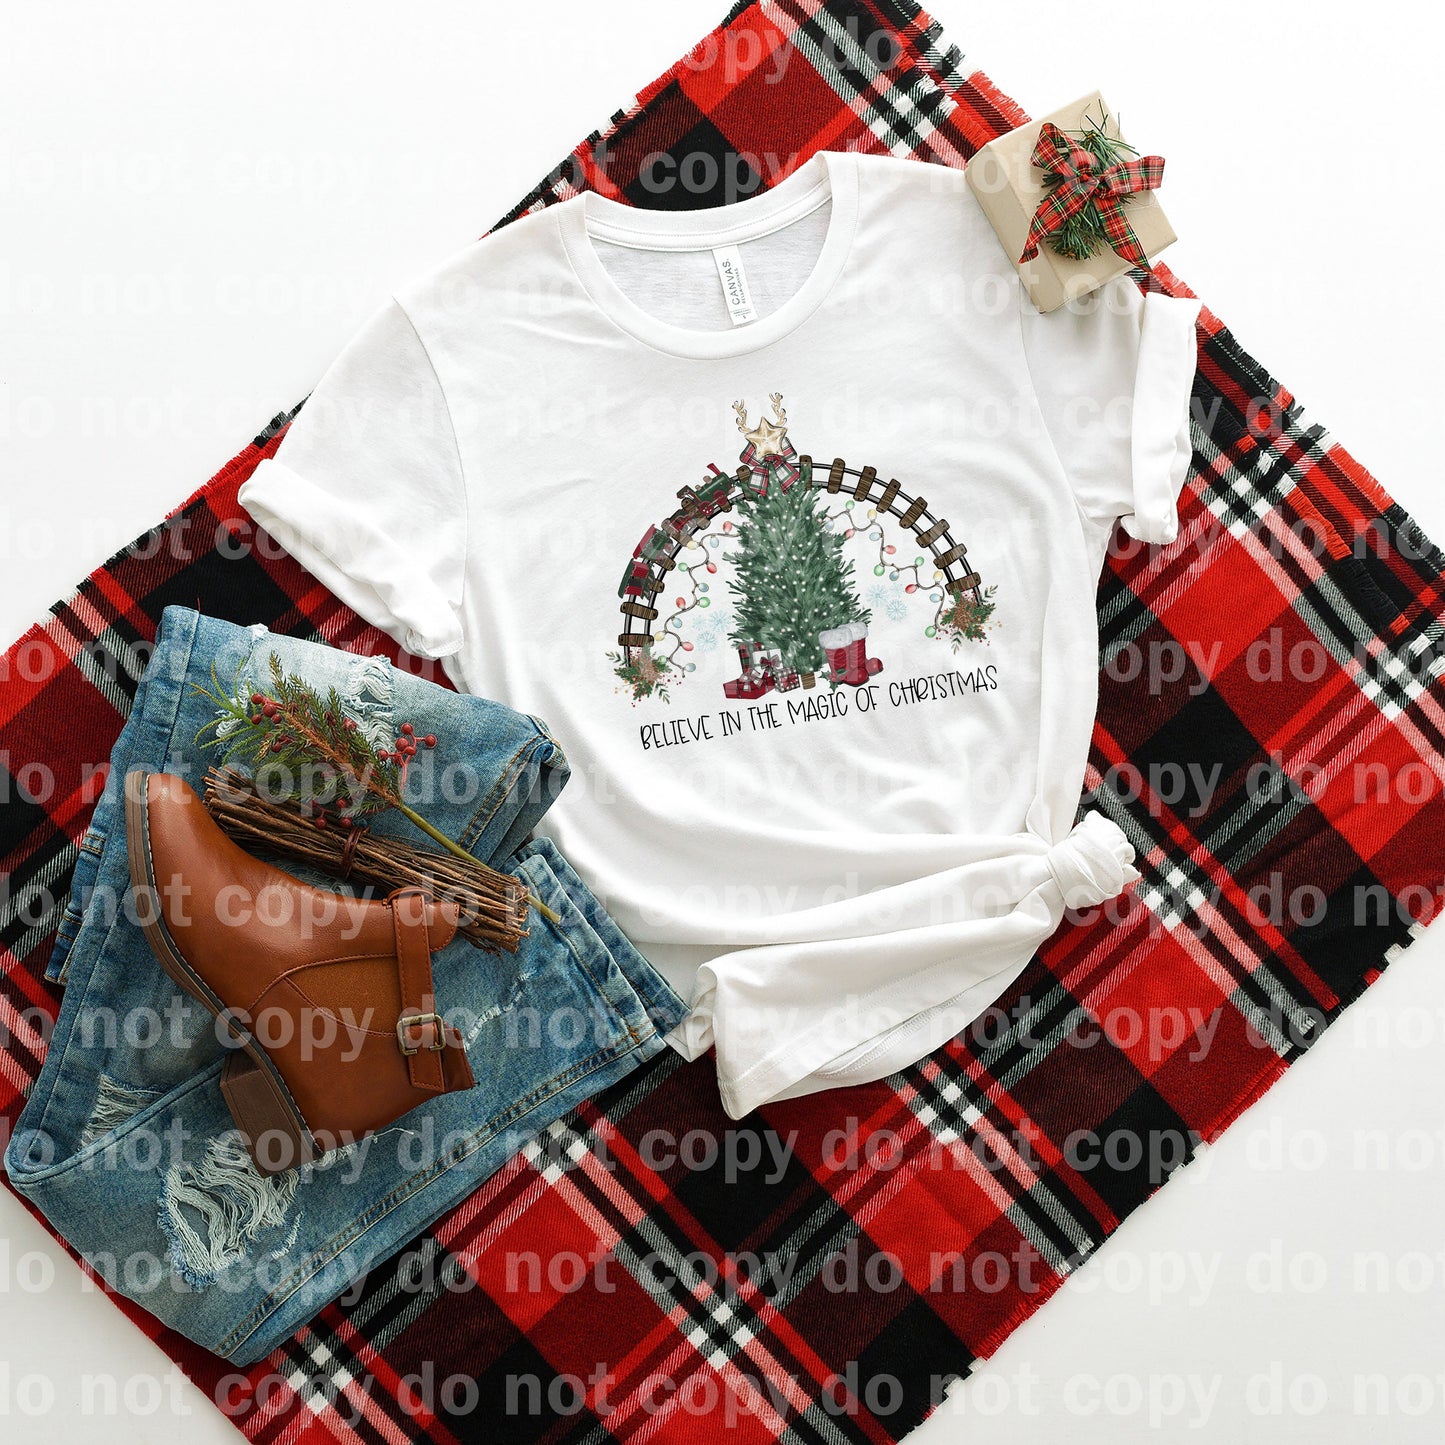 Believe in the magic of Christmas Tree Rainbow Dream Print or Sublimation Print